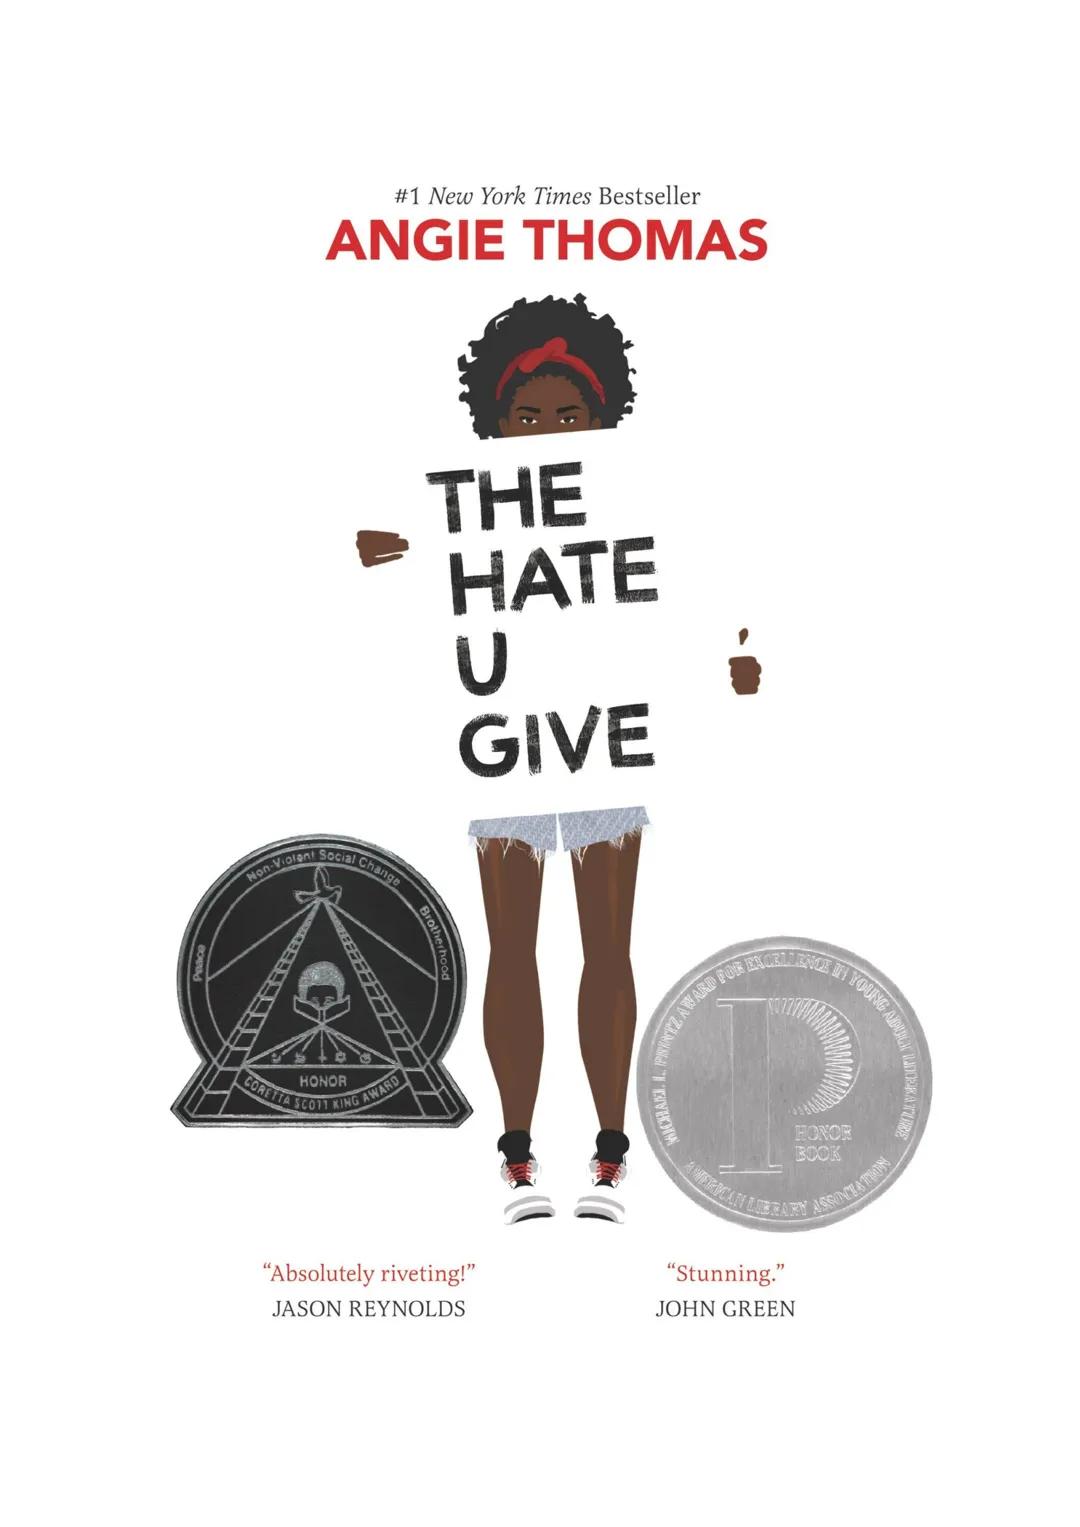 #1 New York Times Bestseller
ANGIE THOMAS
Non-Violent Social Change
HONOR
CORETTA SCO11 KING AWARD
THE
HATE
U
GIVE
"Absolutely riveting!"
JA